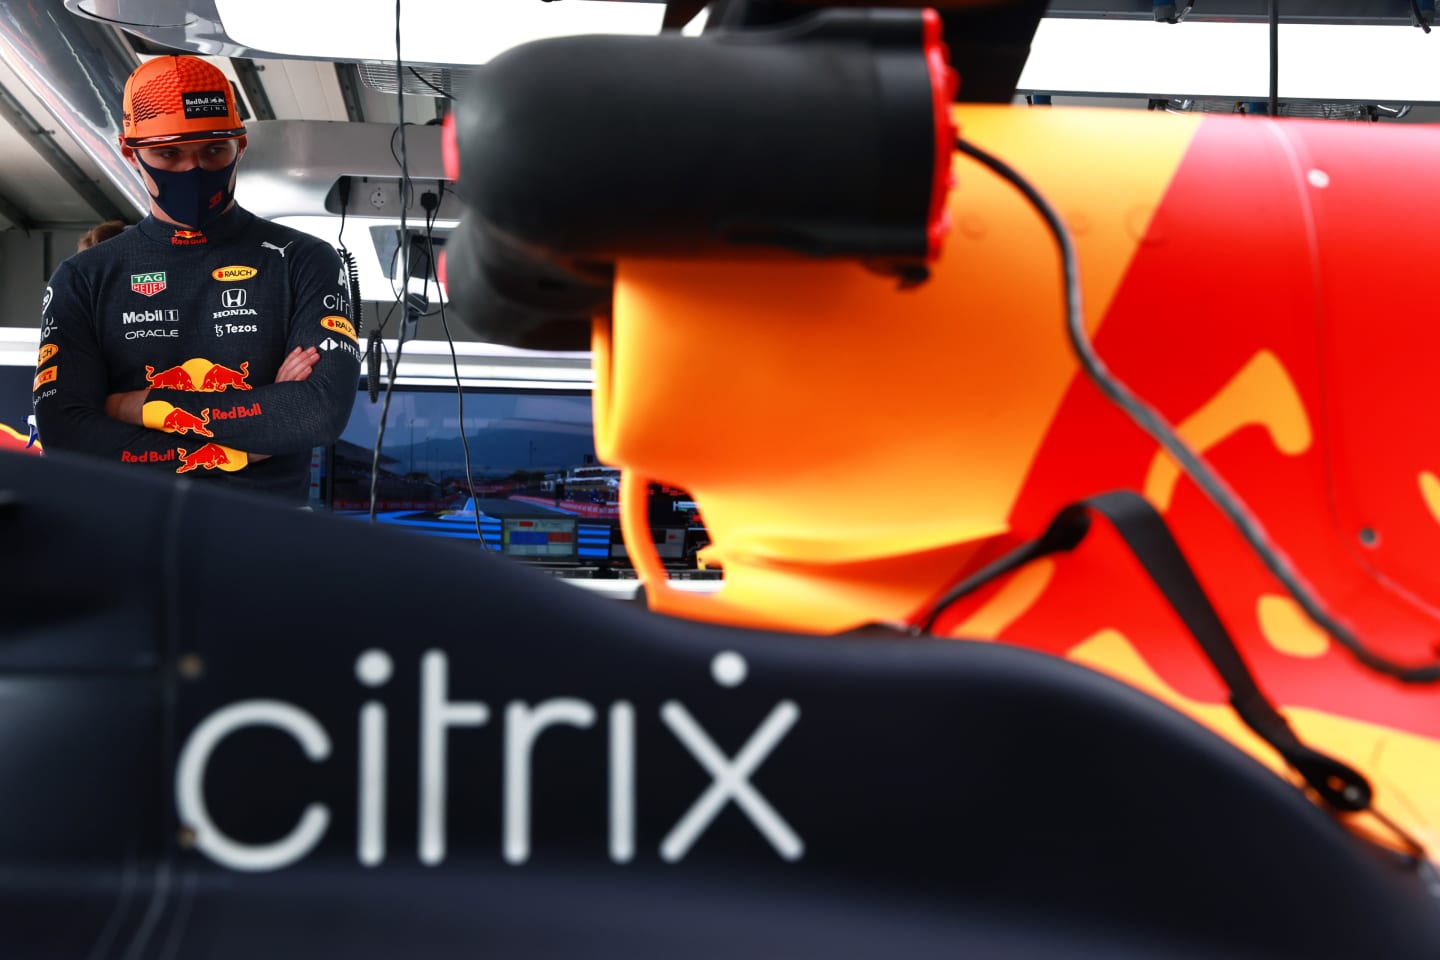 LE CASTELLET, FRANCE - JUNE 19: Max Verstappen of Netherlands and Red Bull Racing prepares to drive in the garage during qualifying ahead of the F1 Grand Prix of France at Circuit Paul Ricard on June 19, 2021 in Le Castellet, France. (Photo by Mark Thompson/Getty Images)